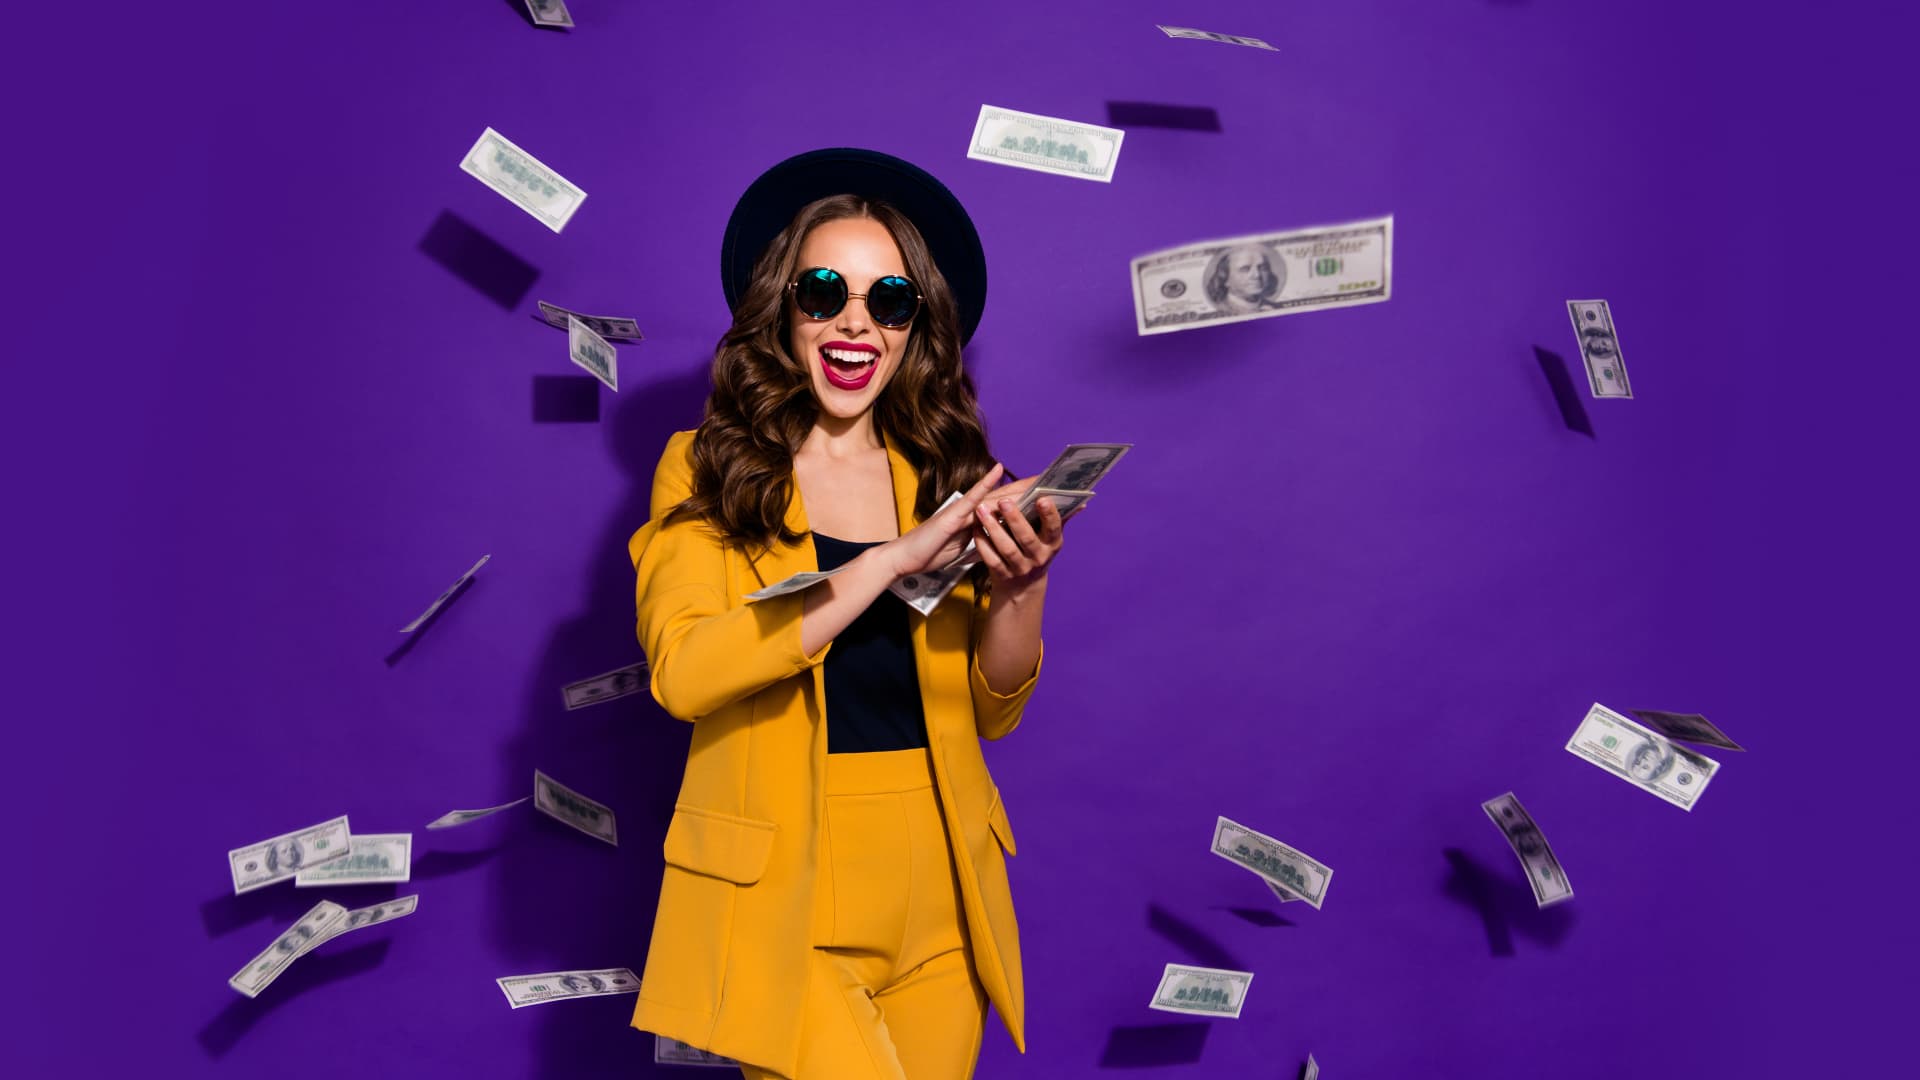 Earn extra cash with these 11 lucrative side hustles, says millionaire—some pay up to $3,000/month